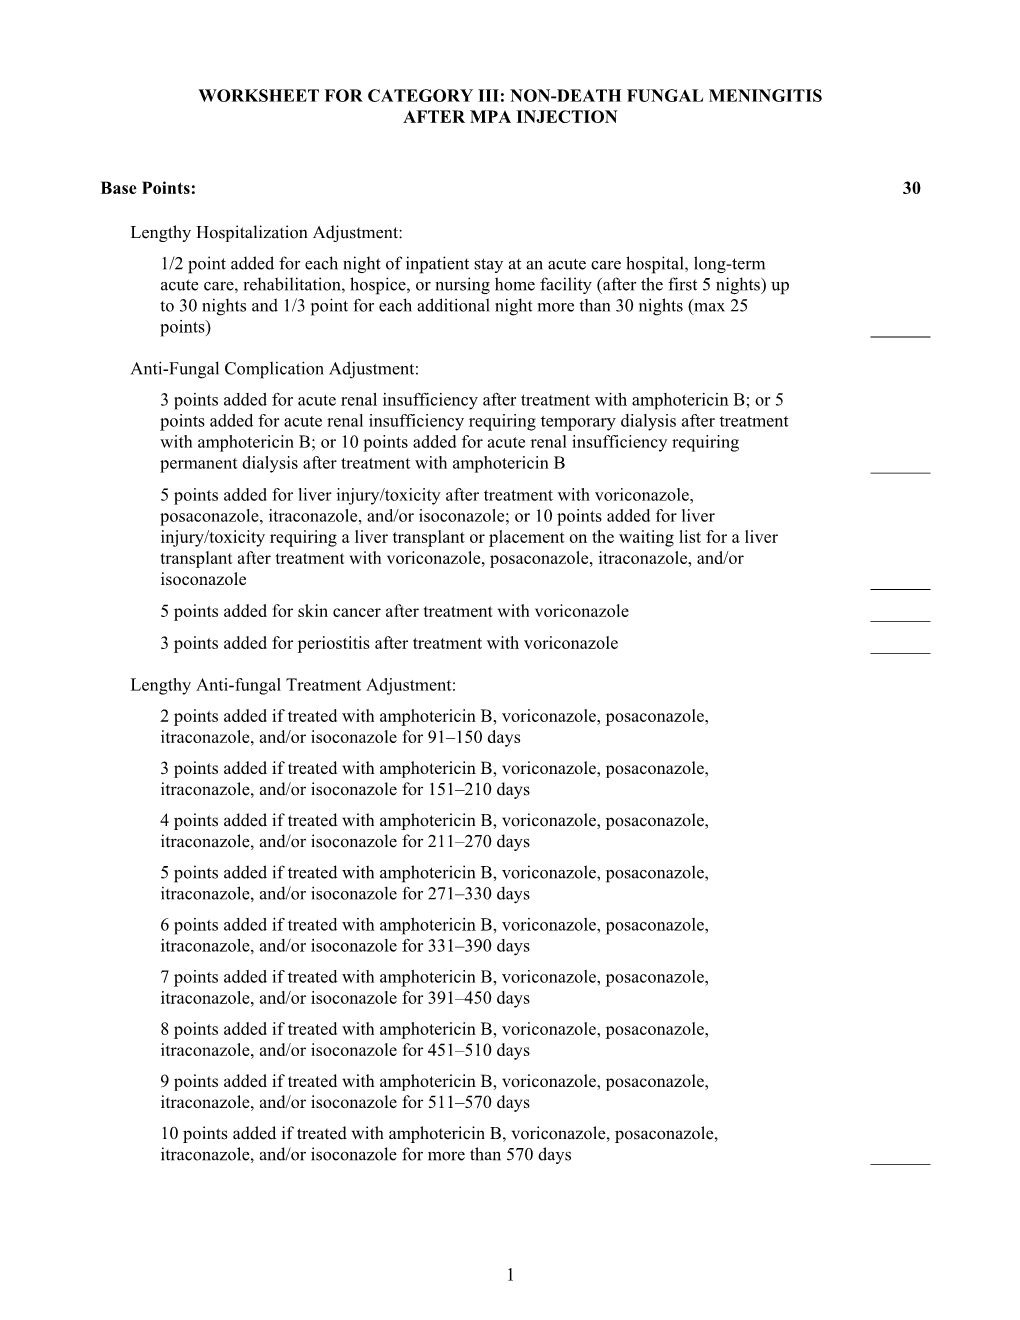 1 Worksheet for Category Iii: Non-Death Fungal